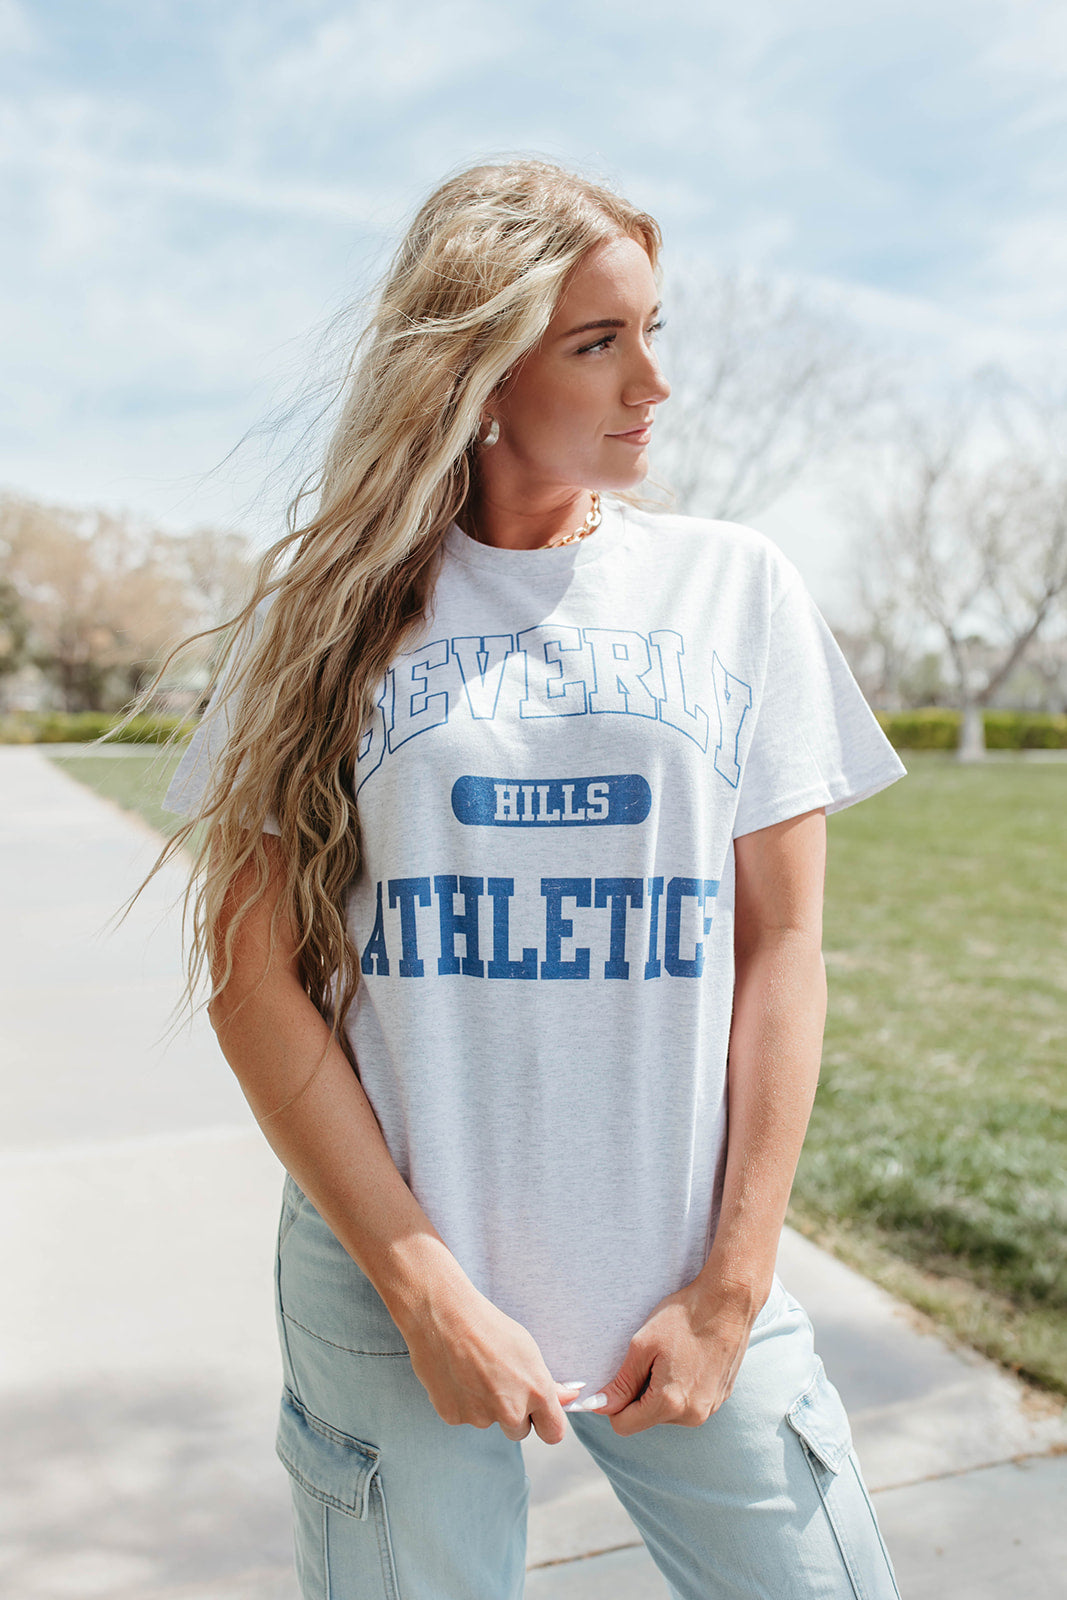 THE BEVERLY HILLS ATHLETICS OVERSIZED GRAPHIC IN GREY